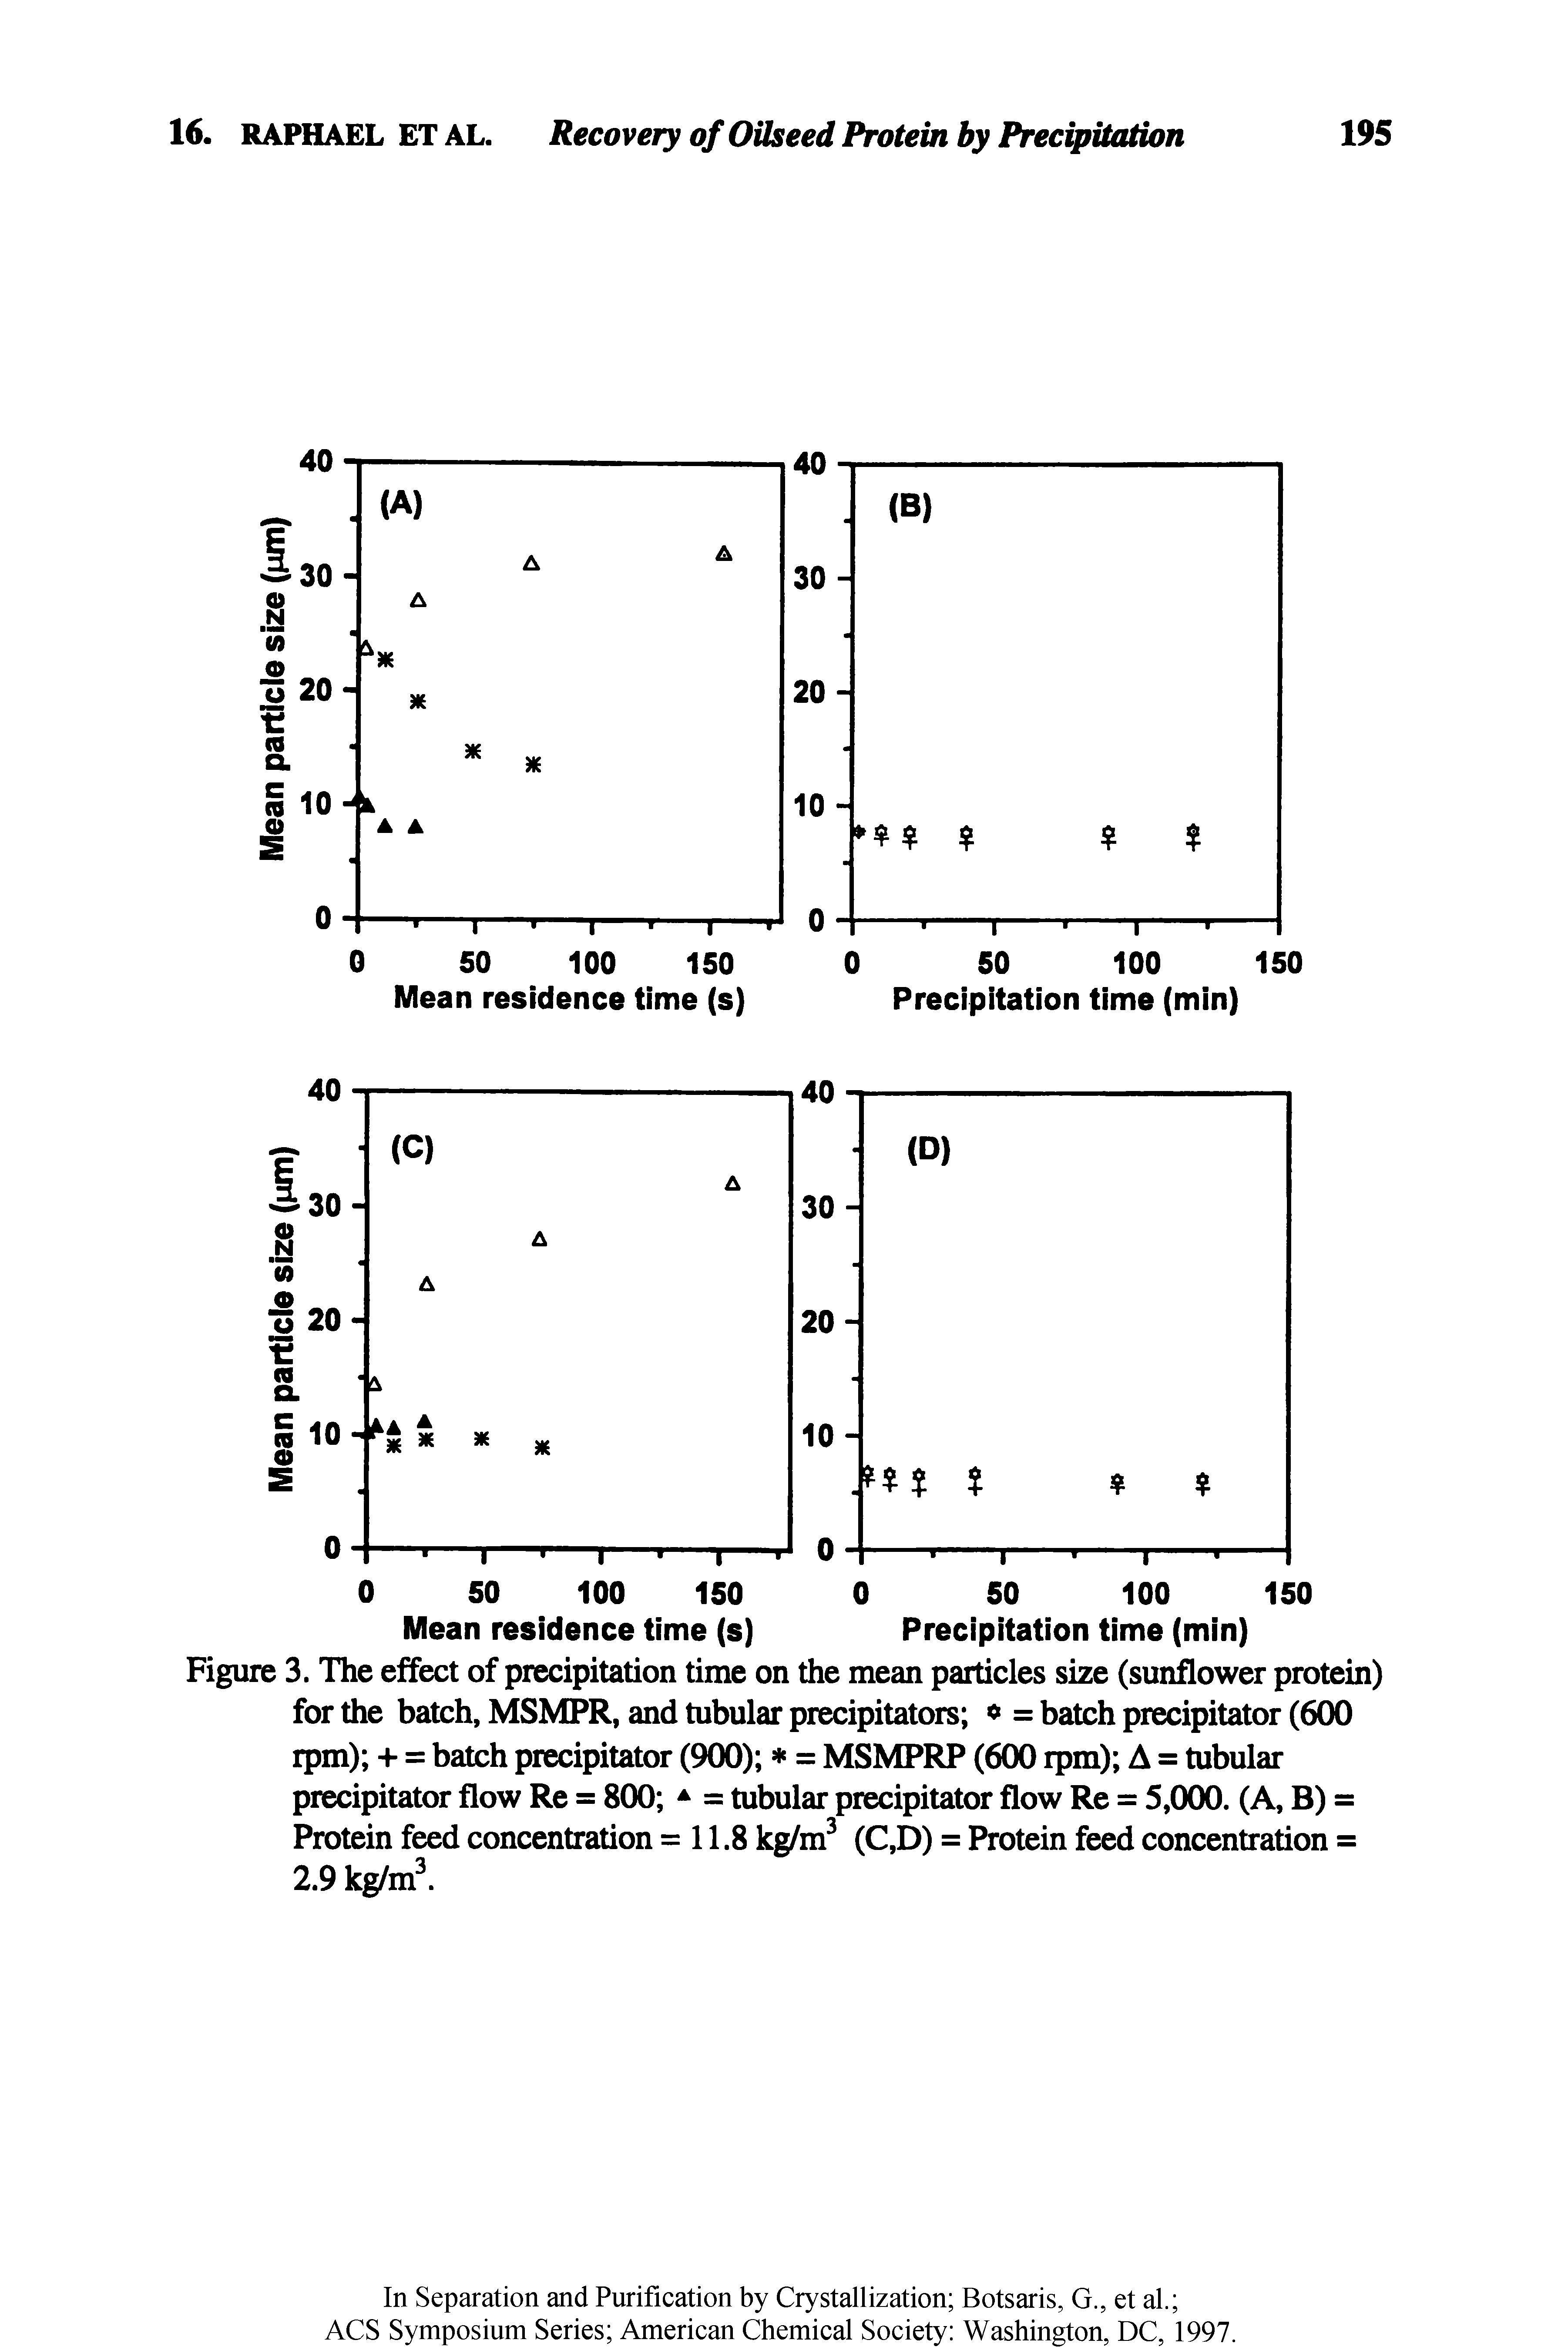 Figure 3. The effect of precipitation time on the mean particles size (sunflower protein) for the batch, MSMPR, and tubular precipitators = batch precipitator (600 rpm) + = batch precipitator (900) = MSMPRP (600 ipm) A = tubular precipitator flow Re = 800 = tubular precipitator flow Re = 5,000. (A, B) = Protein feed concentration =11.8 kg/m (C,D) = Protein feed concentration = 2.9kg/ml...